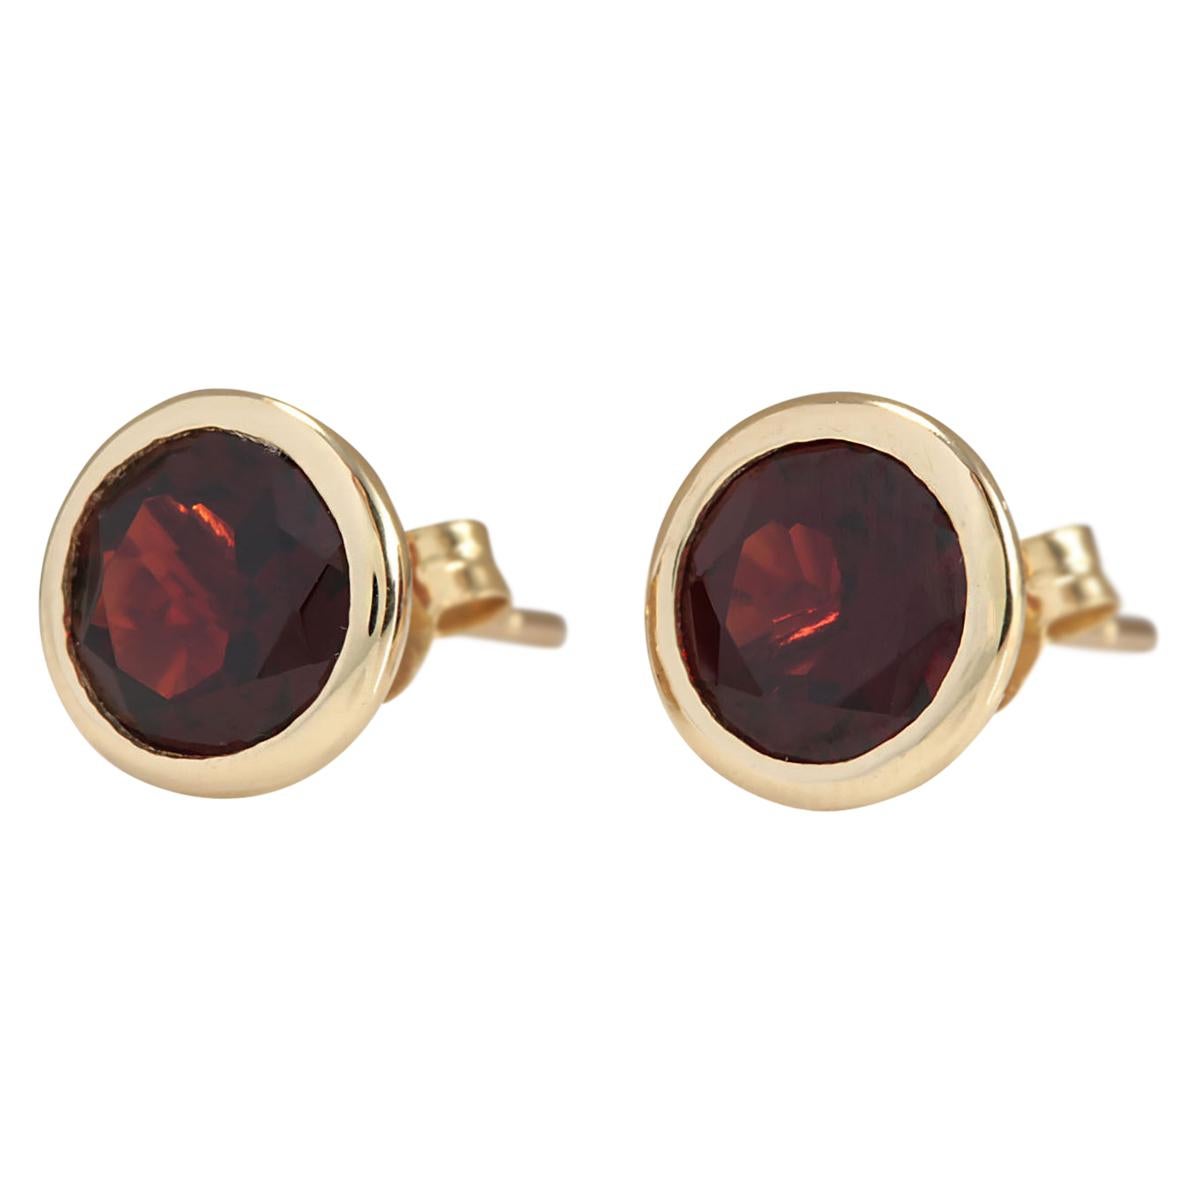 Stamped: 14K Yellow Gold
Total Earrings Weight: 1.8 Grams
Total Natural Garnet Weight is 3.00 Carat (Measures: 6.00x6.00 mm)
Color: Red
Face Measures: 8.90x8.90 mm
Sku: [703324W]